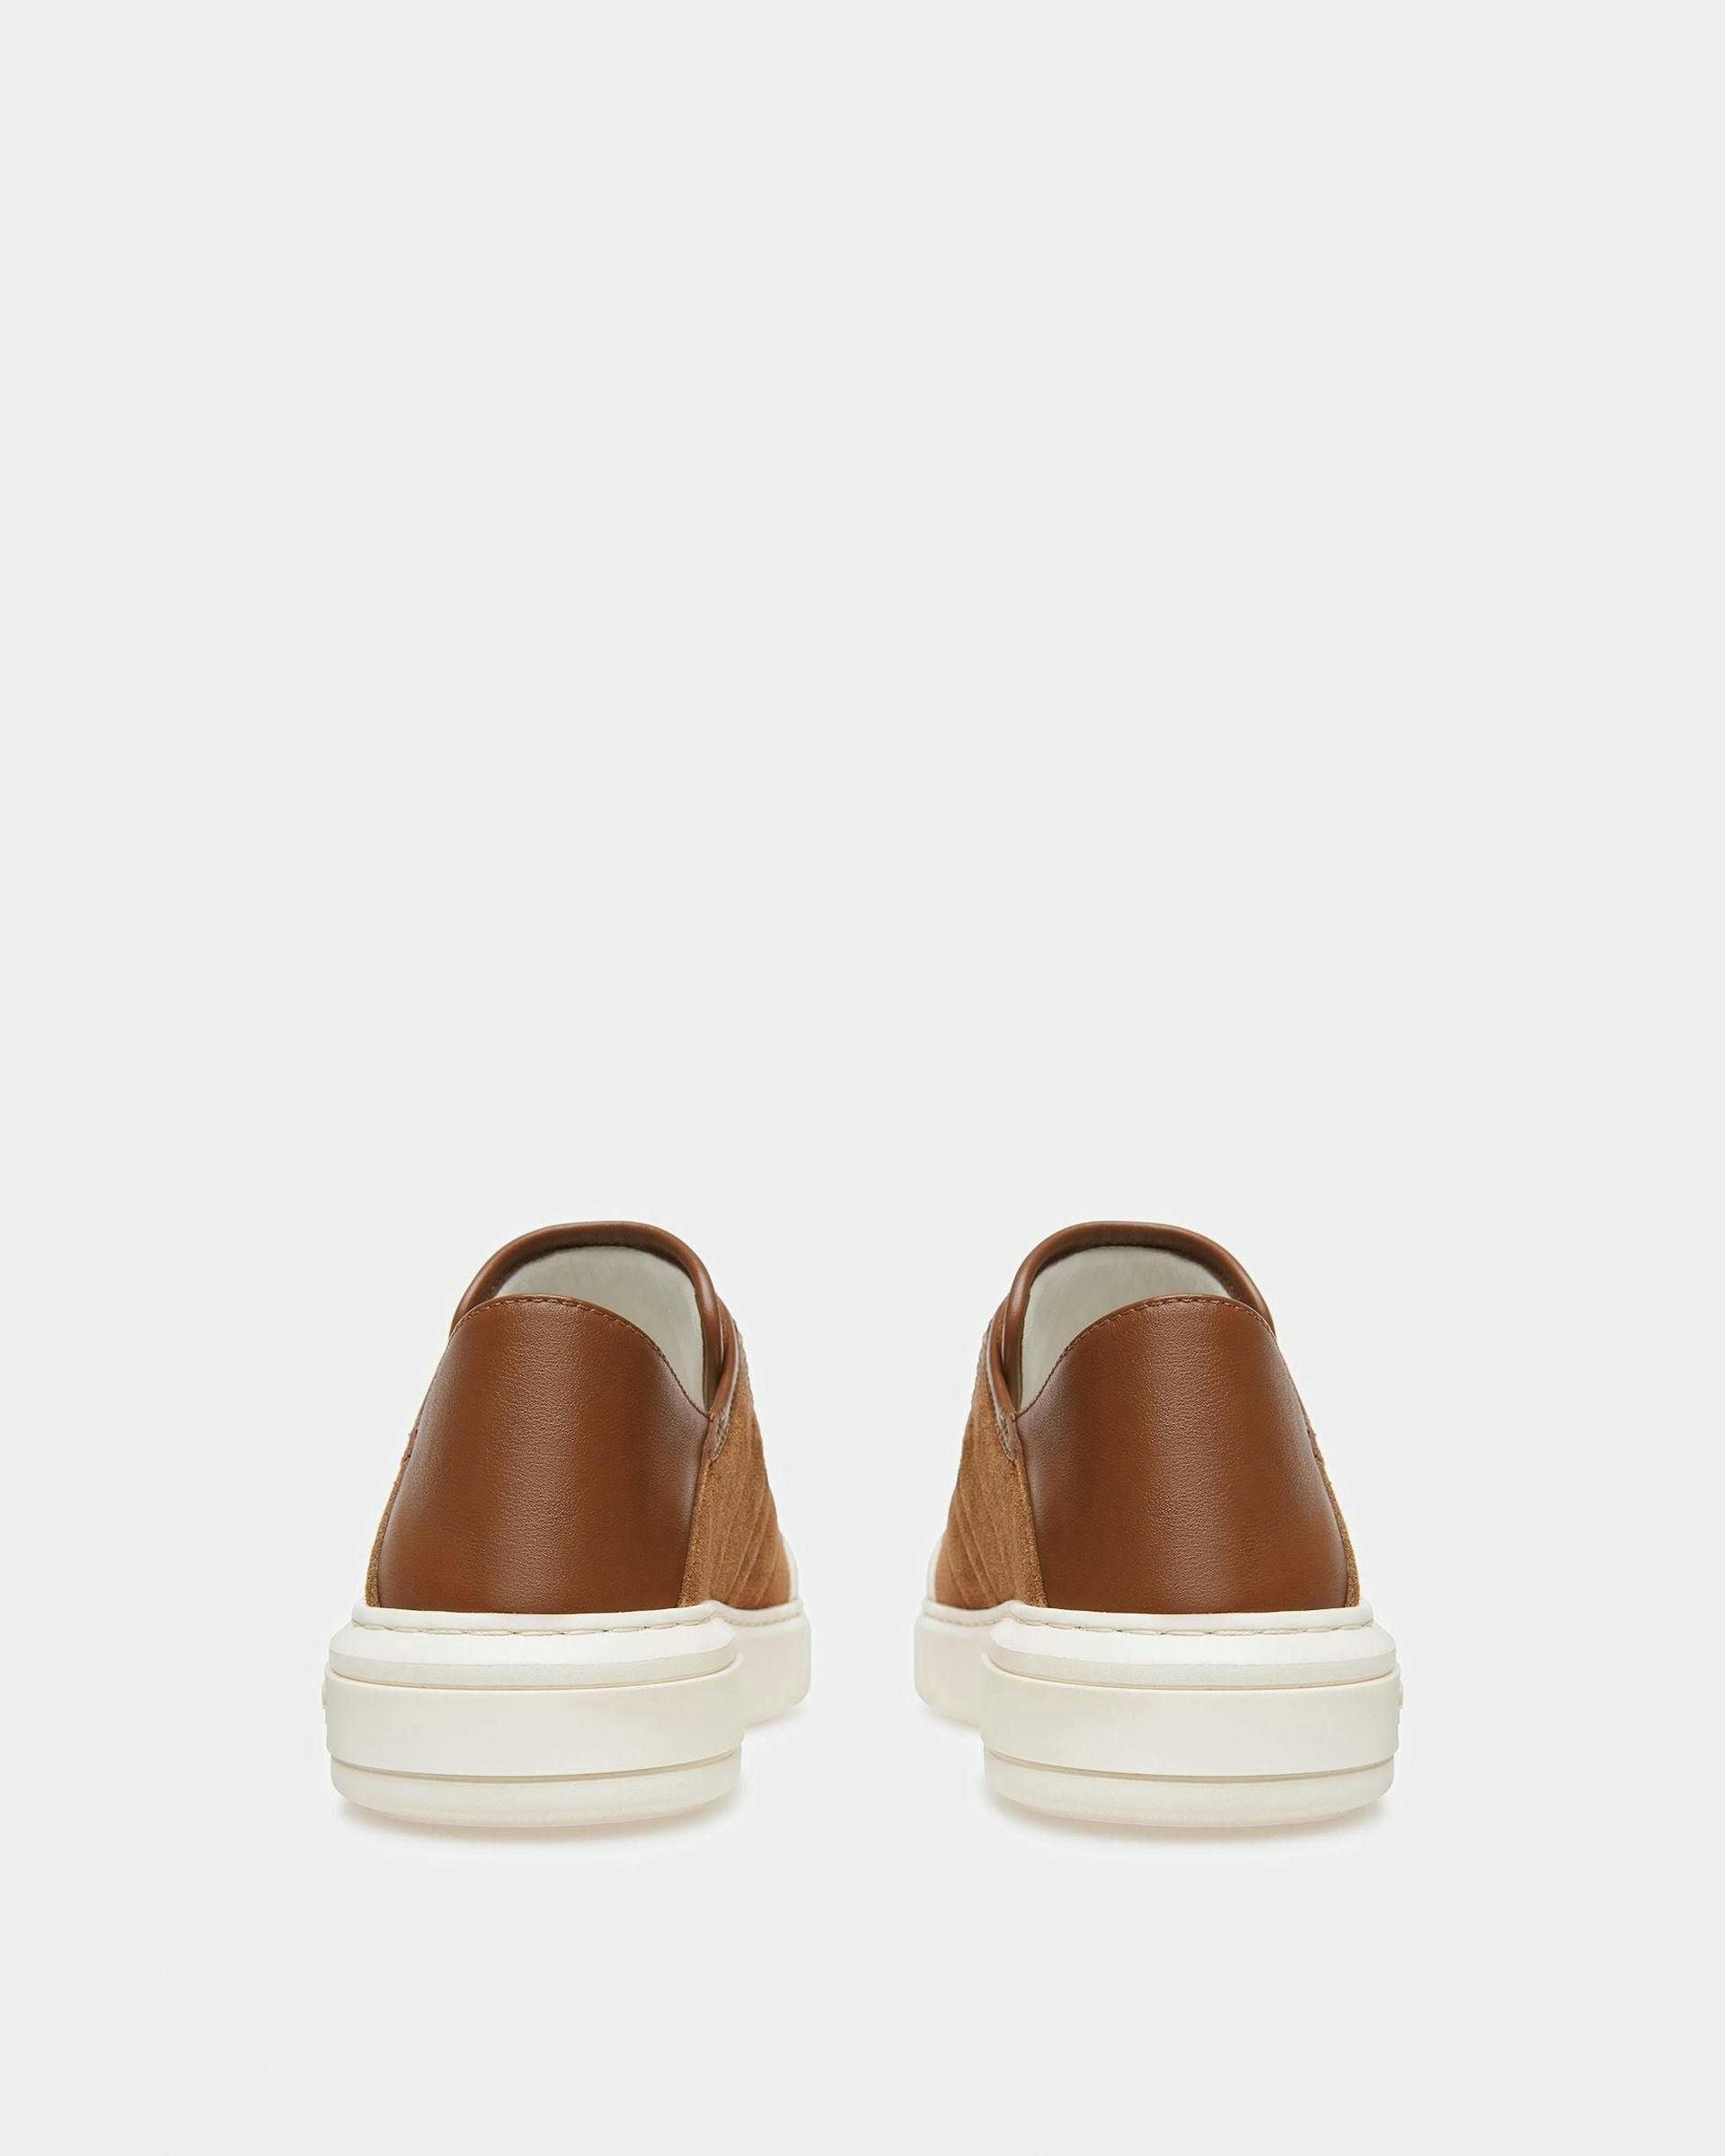 Marily Suede Sneakers In Brown - Women's - Bally - 04